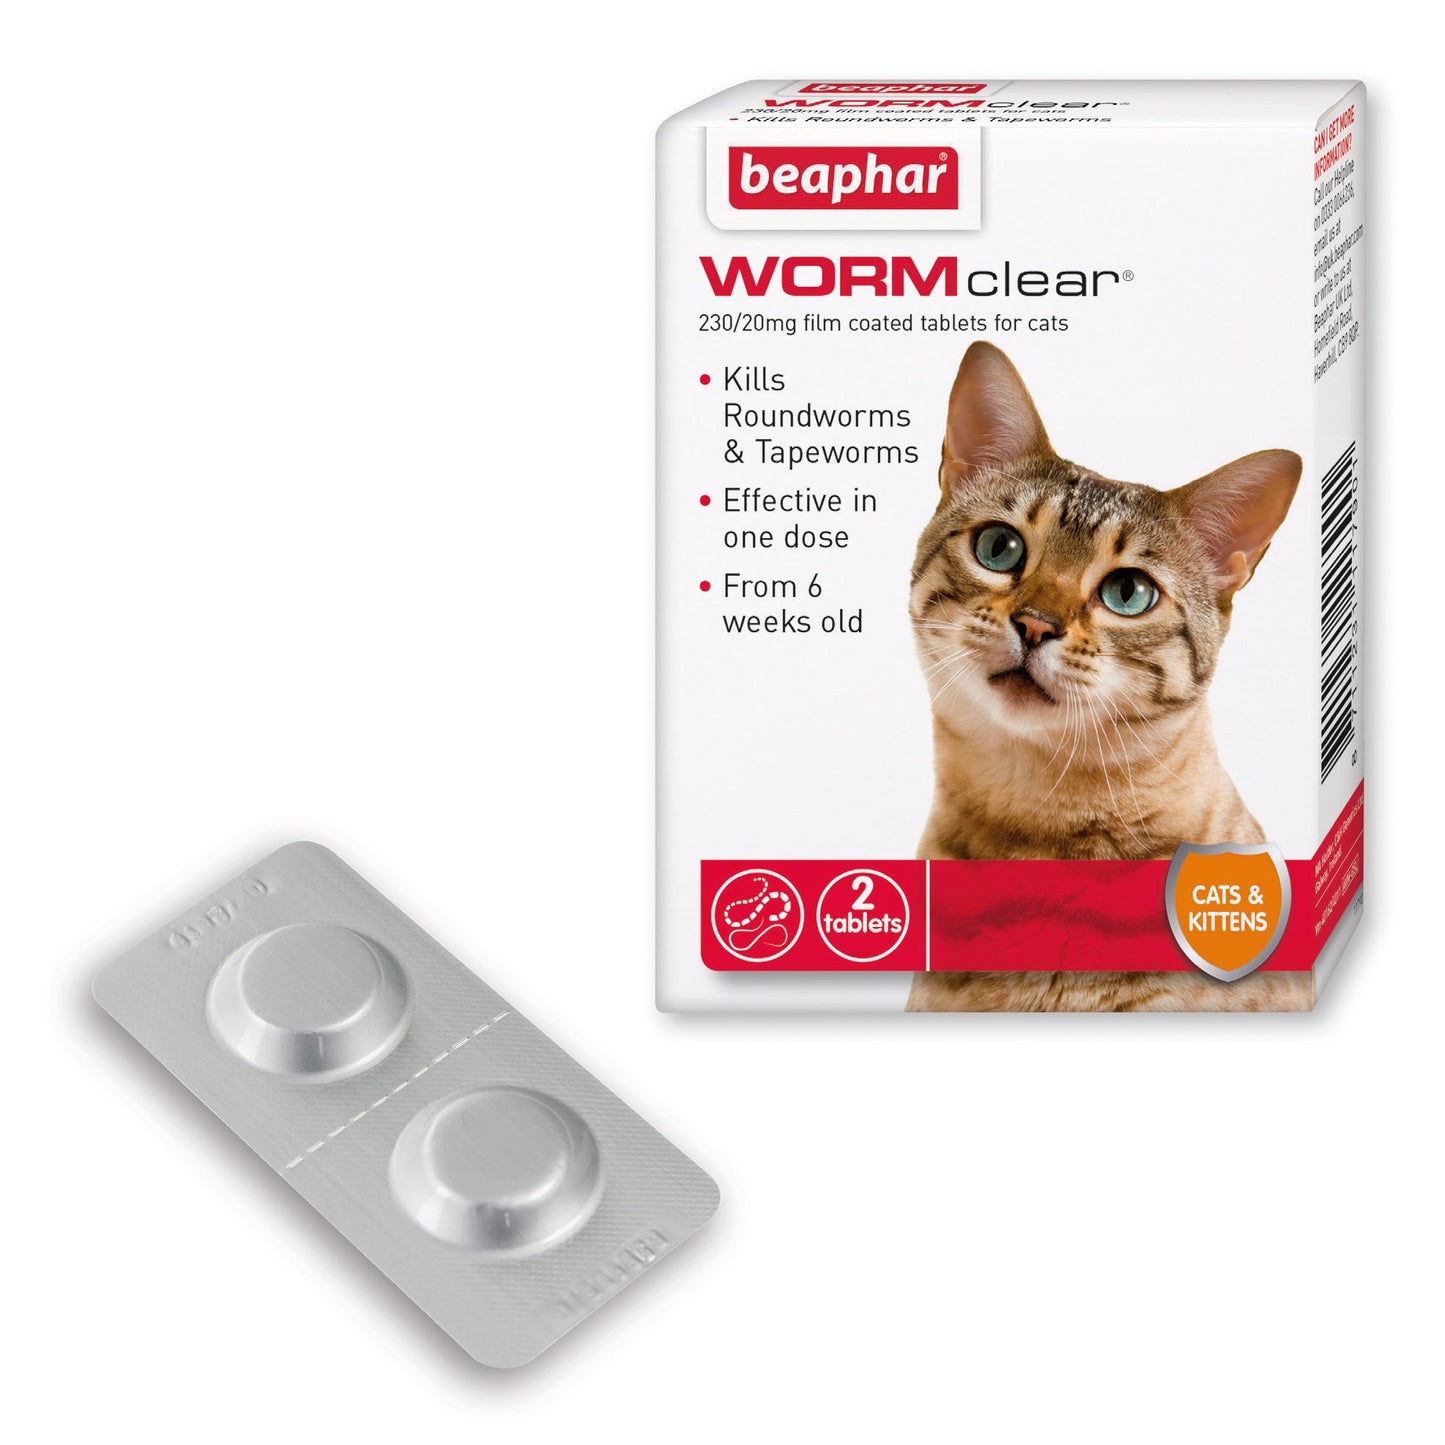 Beaphar WORMclear Worming Tablets for Cats 2 tablets